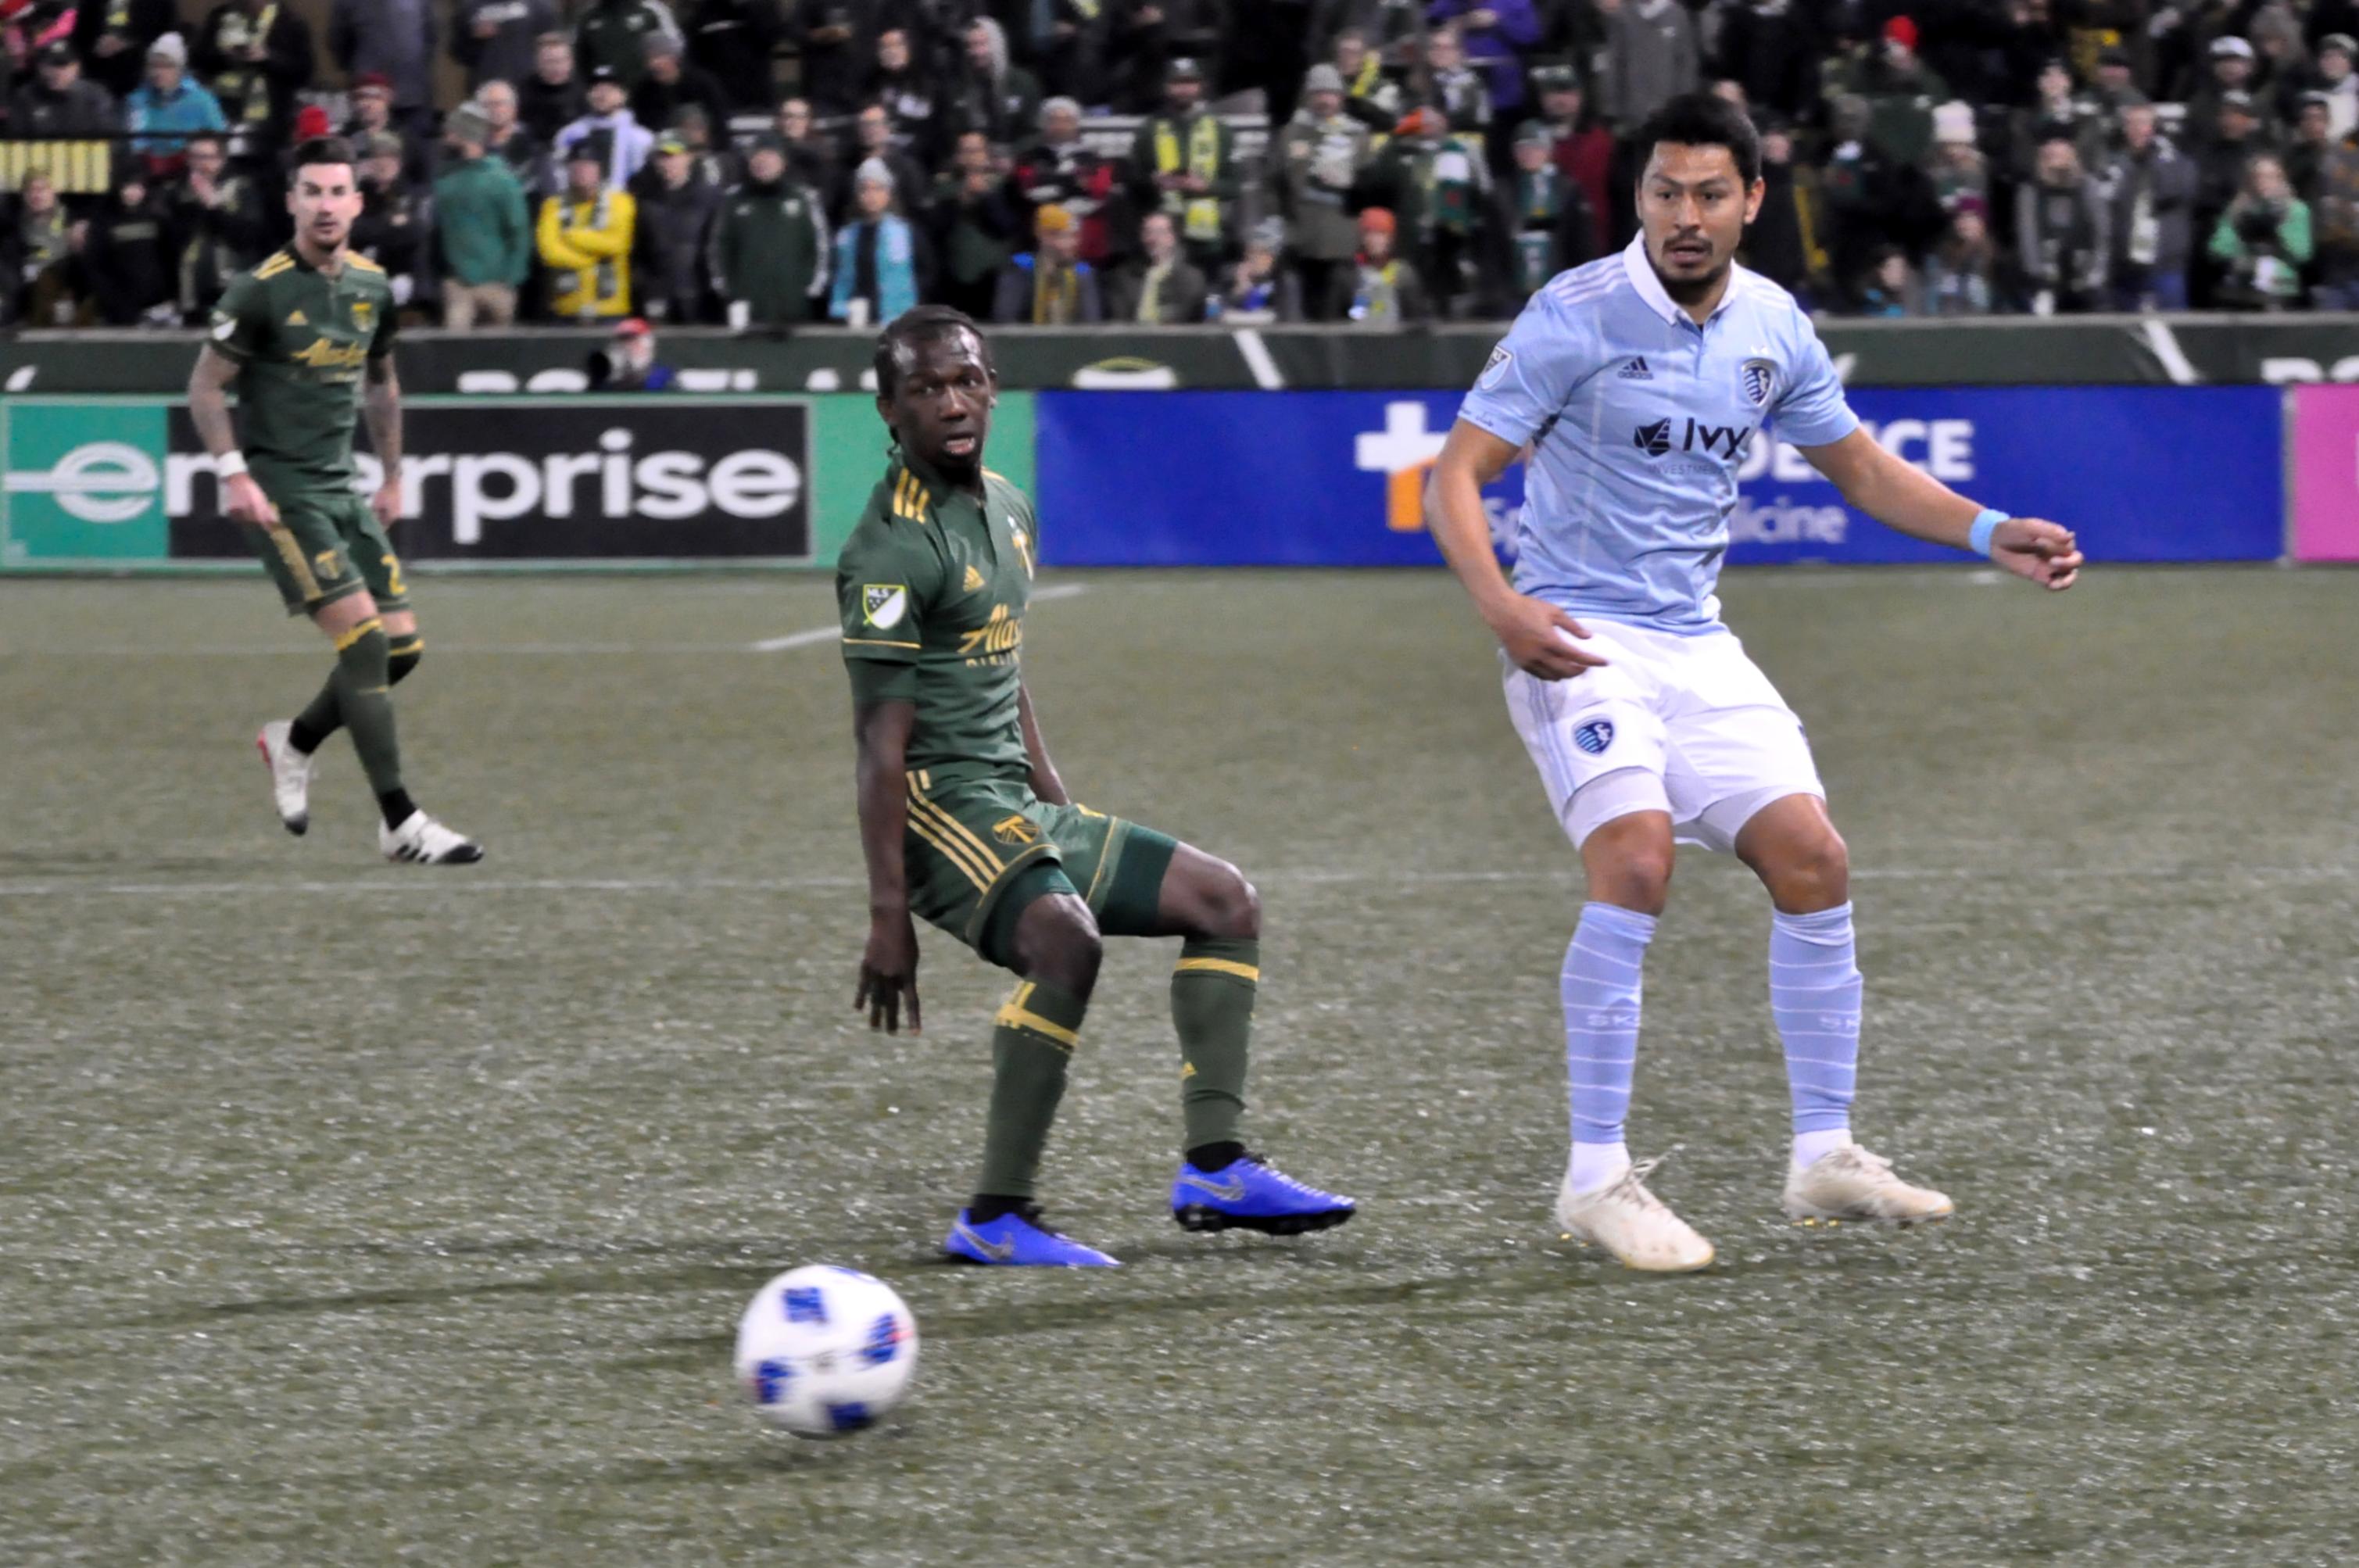 Timbers play to 0-0 draw with Sporting Kansas City in Western Conference Championship Opener